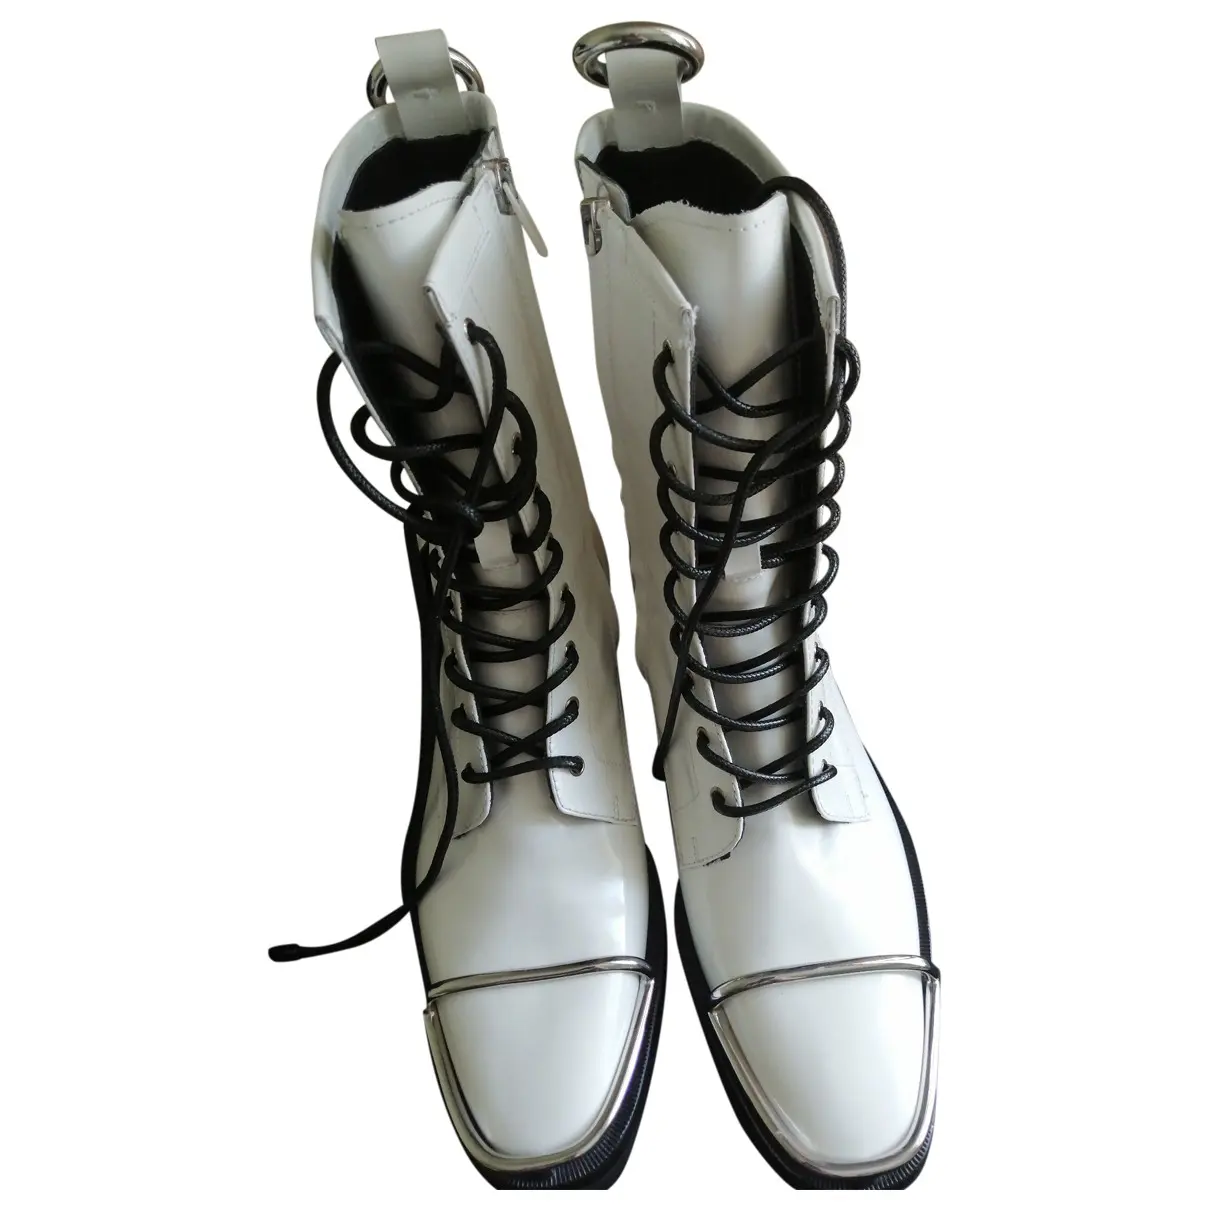 Patent leather lace up boots Alexander Wang